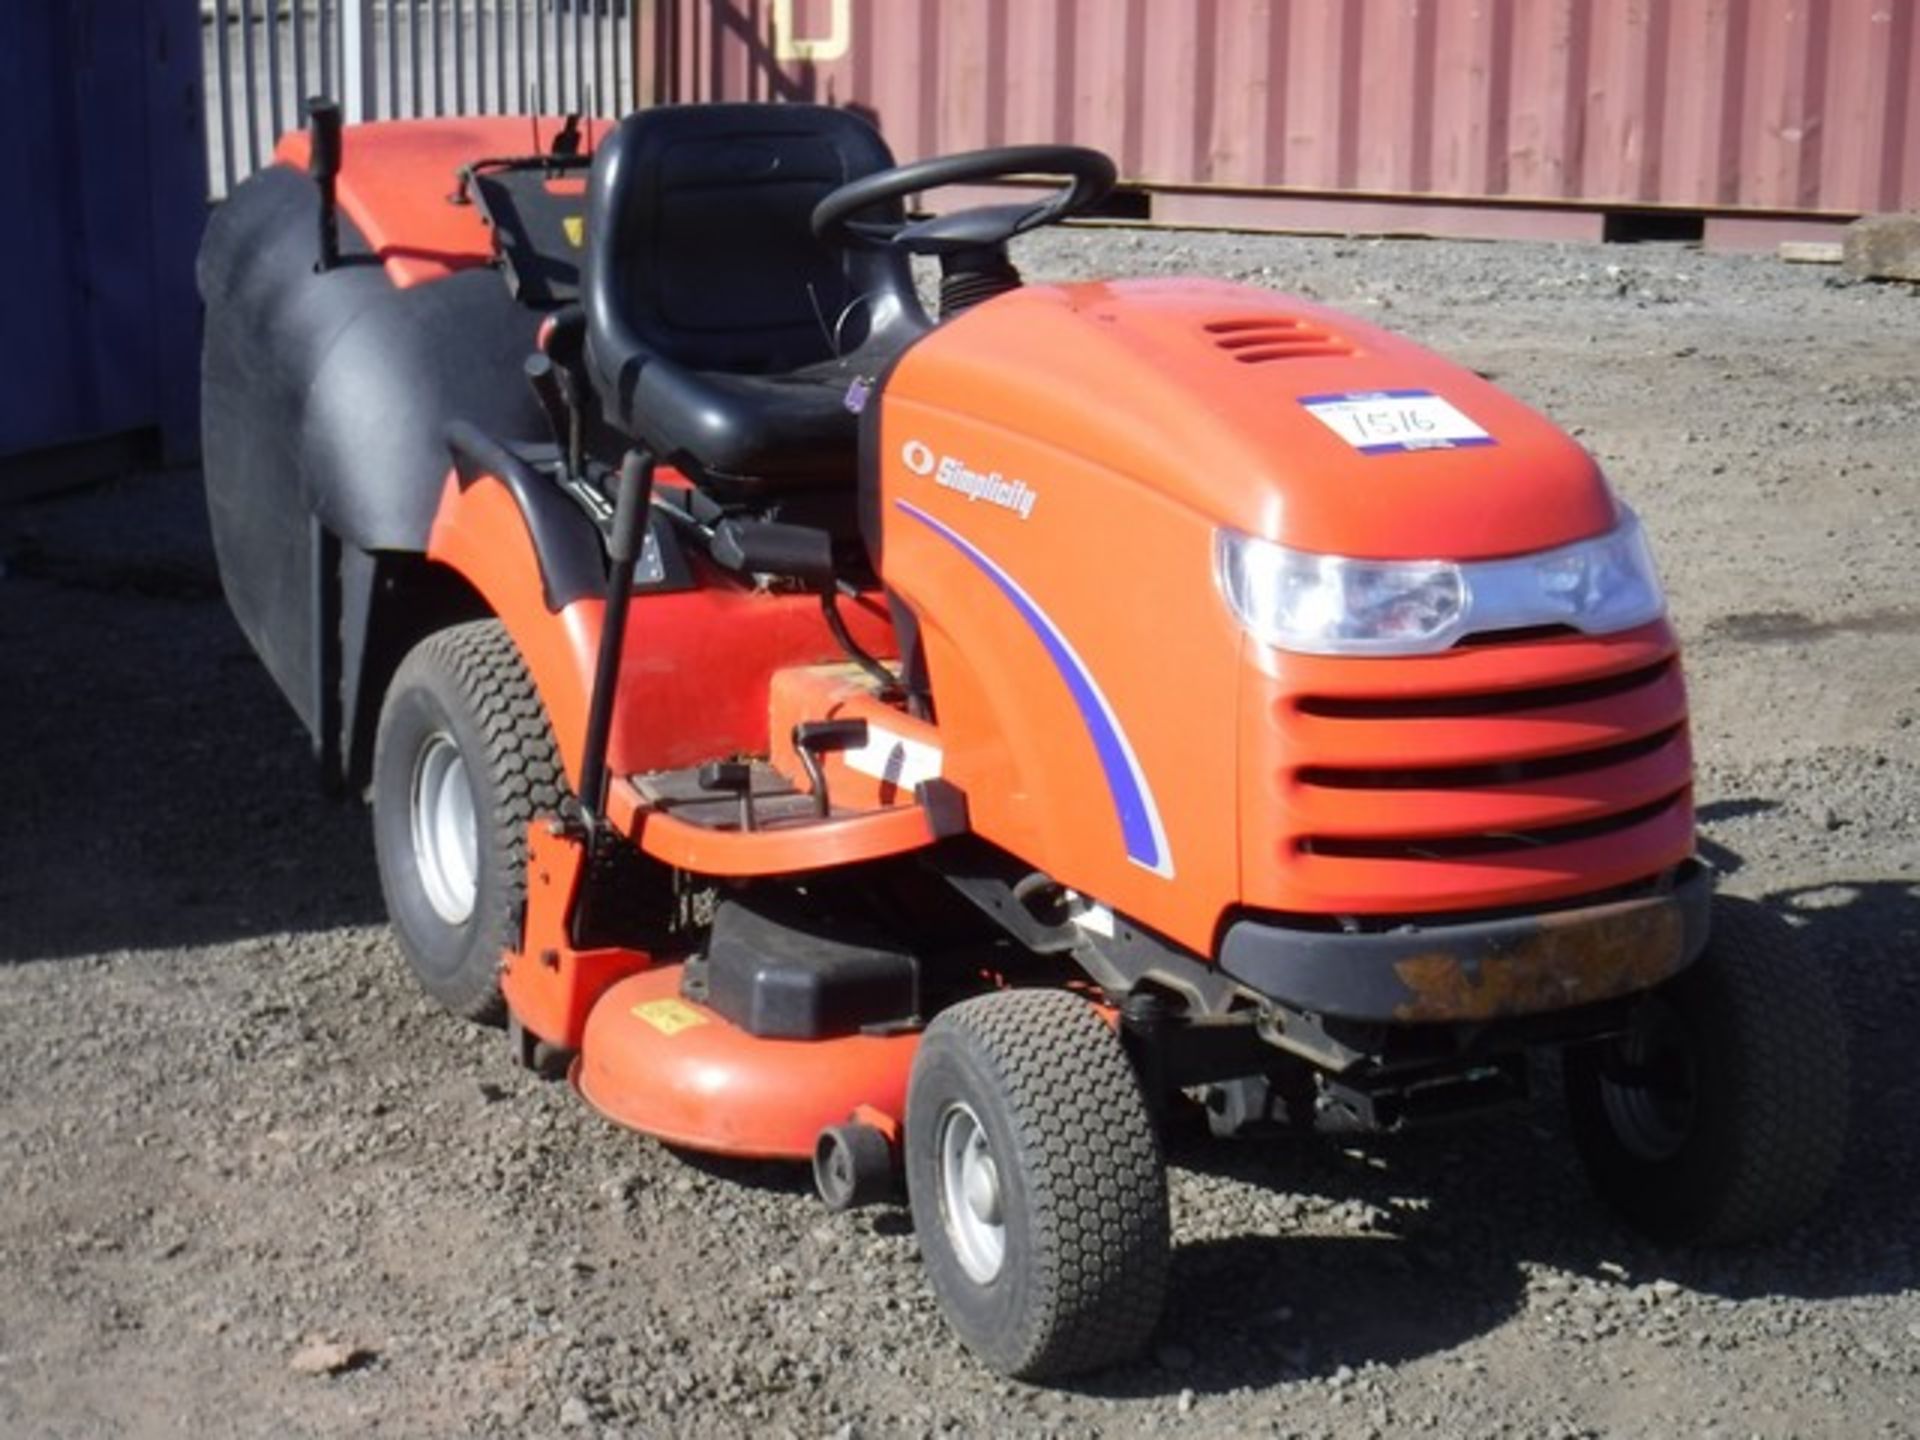 SIMPLICITY 2003 RIDE ON MOWER BARON 18HP, BRIGGS AND STRATTON ENGINE 508.0 HOURS - Image 2 of 7